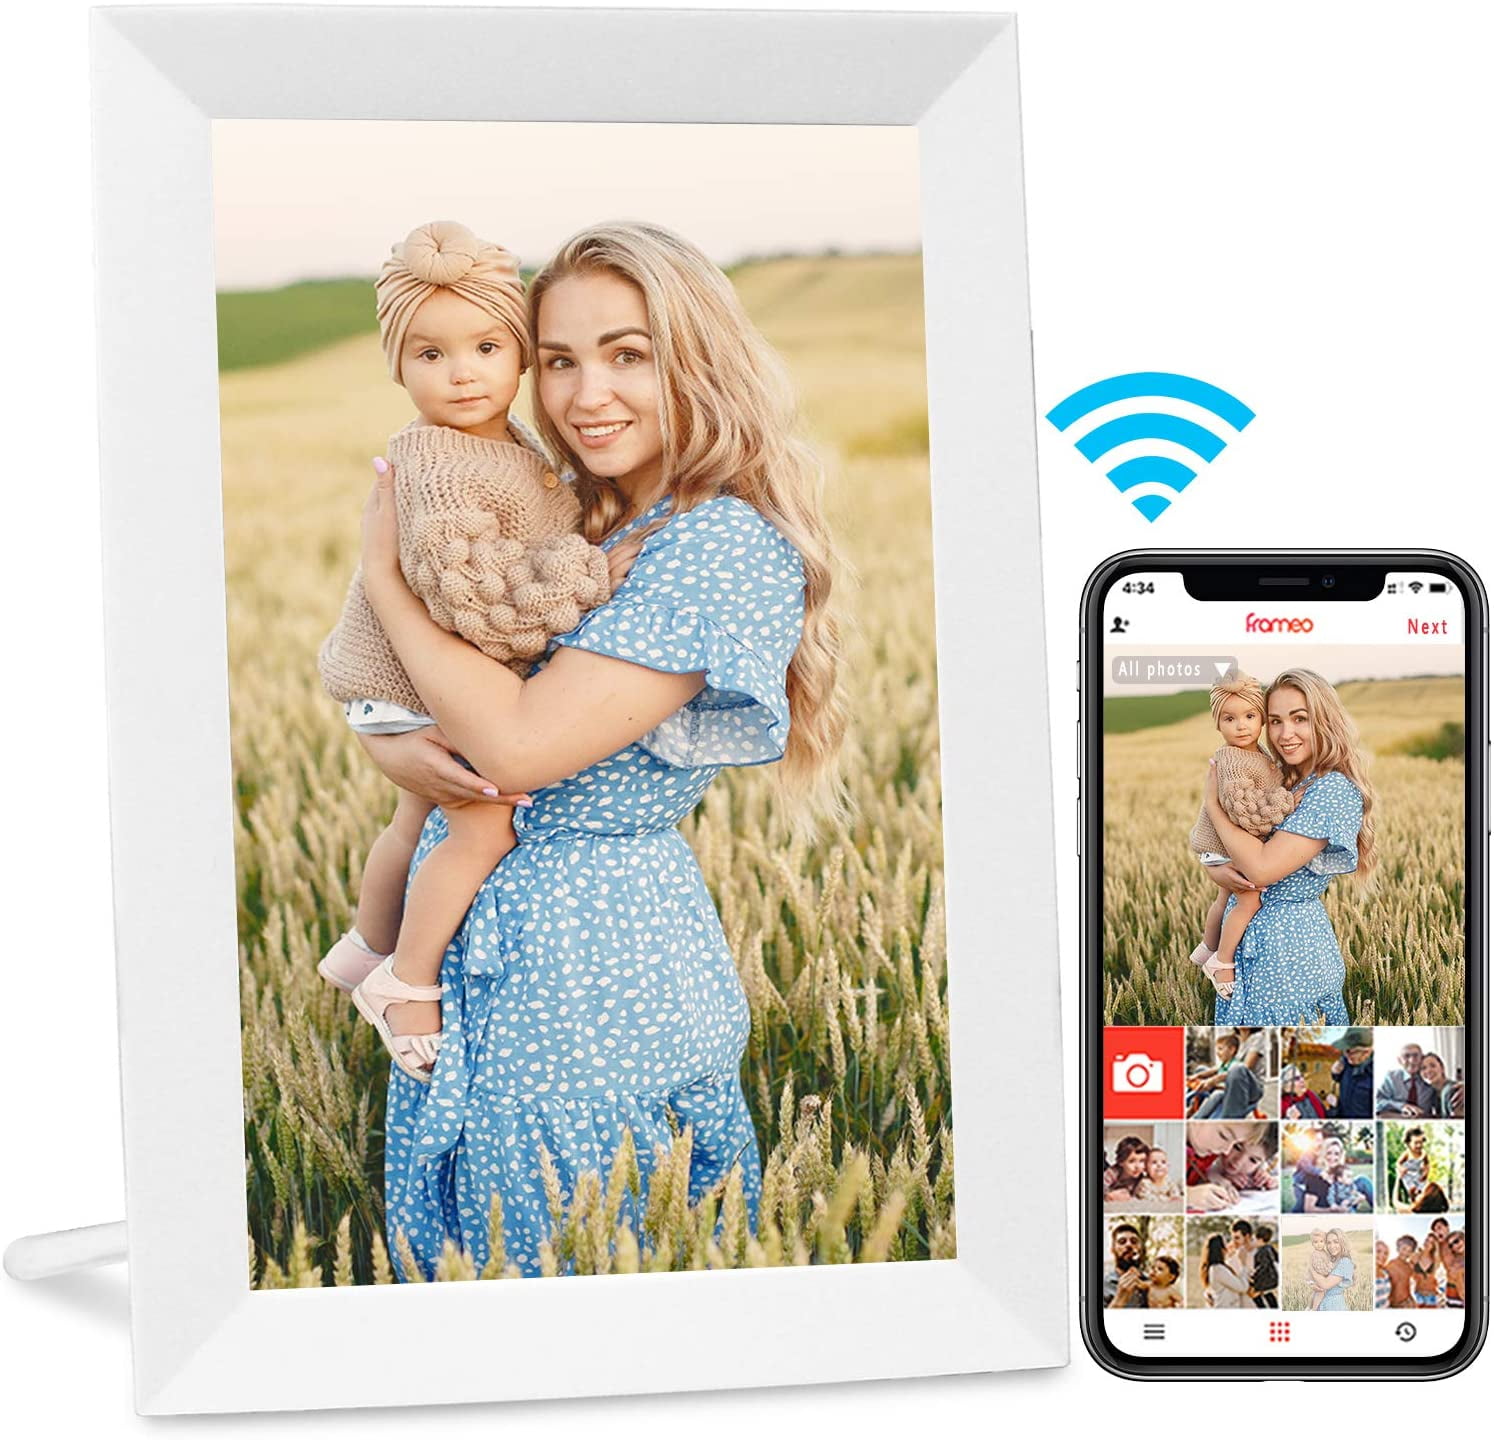 Autumn Rain WiFi Digital Picture Frame 10.1 inch IPS Touch Screen with 16GB Memory 10 inch WiFi, Wood 